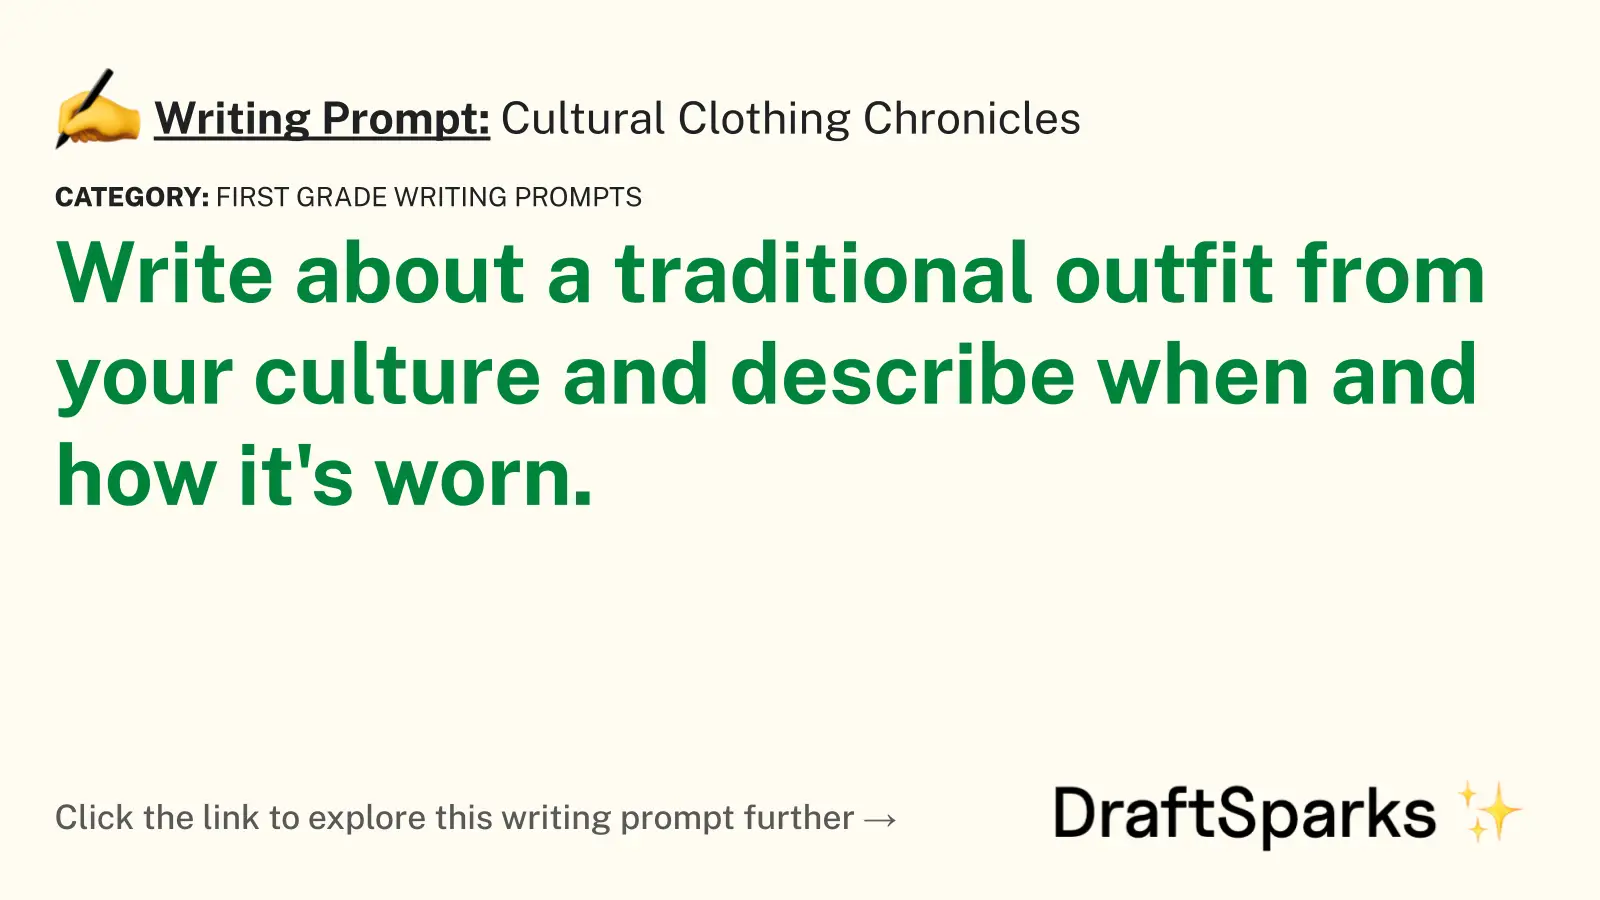 Cultural Clothing Chronicles